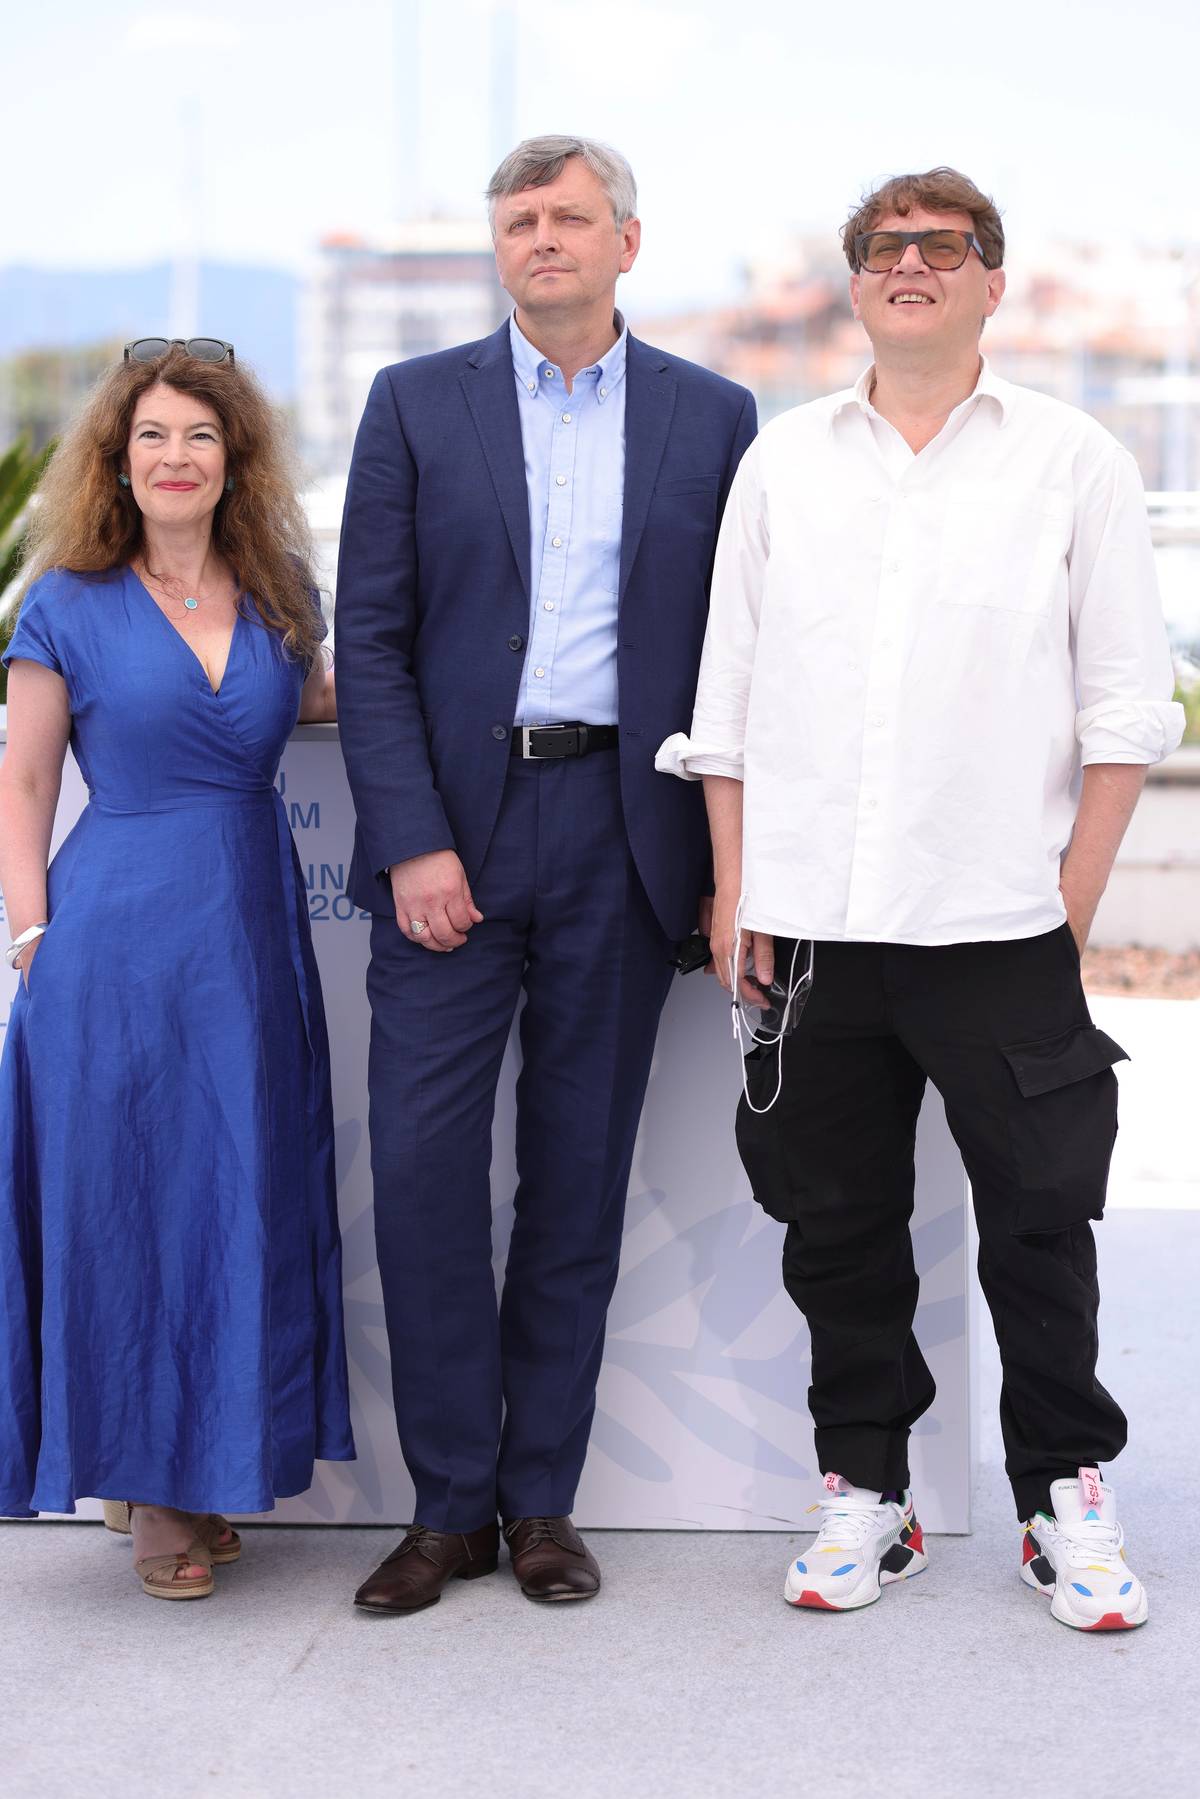 (L to R) Producer Maria Choustova, Director Sergei Loznitza and Producer Ilya Khrzhanovskiy attend the "Baby Yar. Context" photocall during the 74th annual Cannes Film Festival on July 11, 2021 in Cannes, France. 